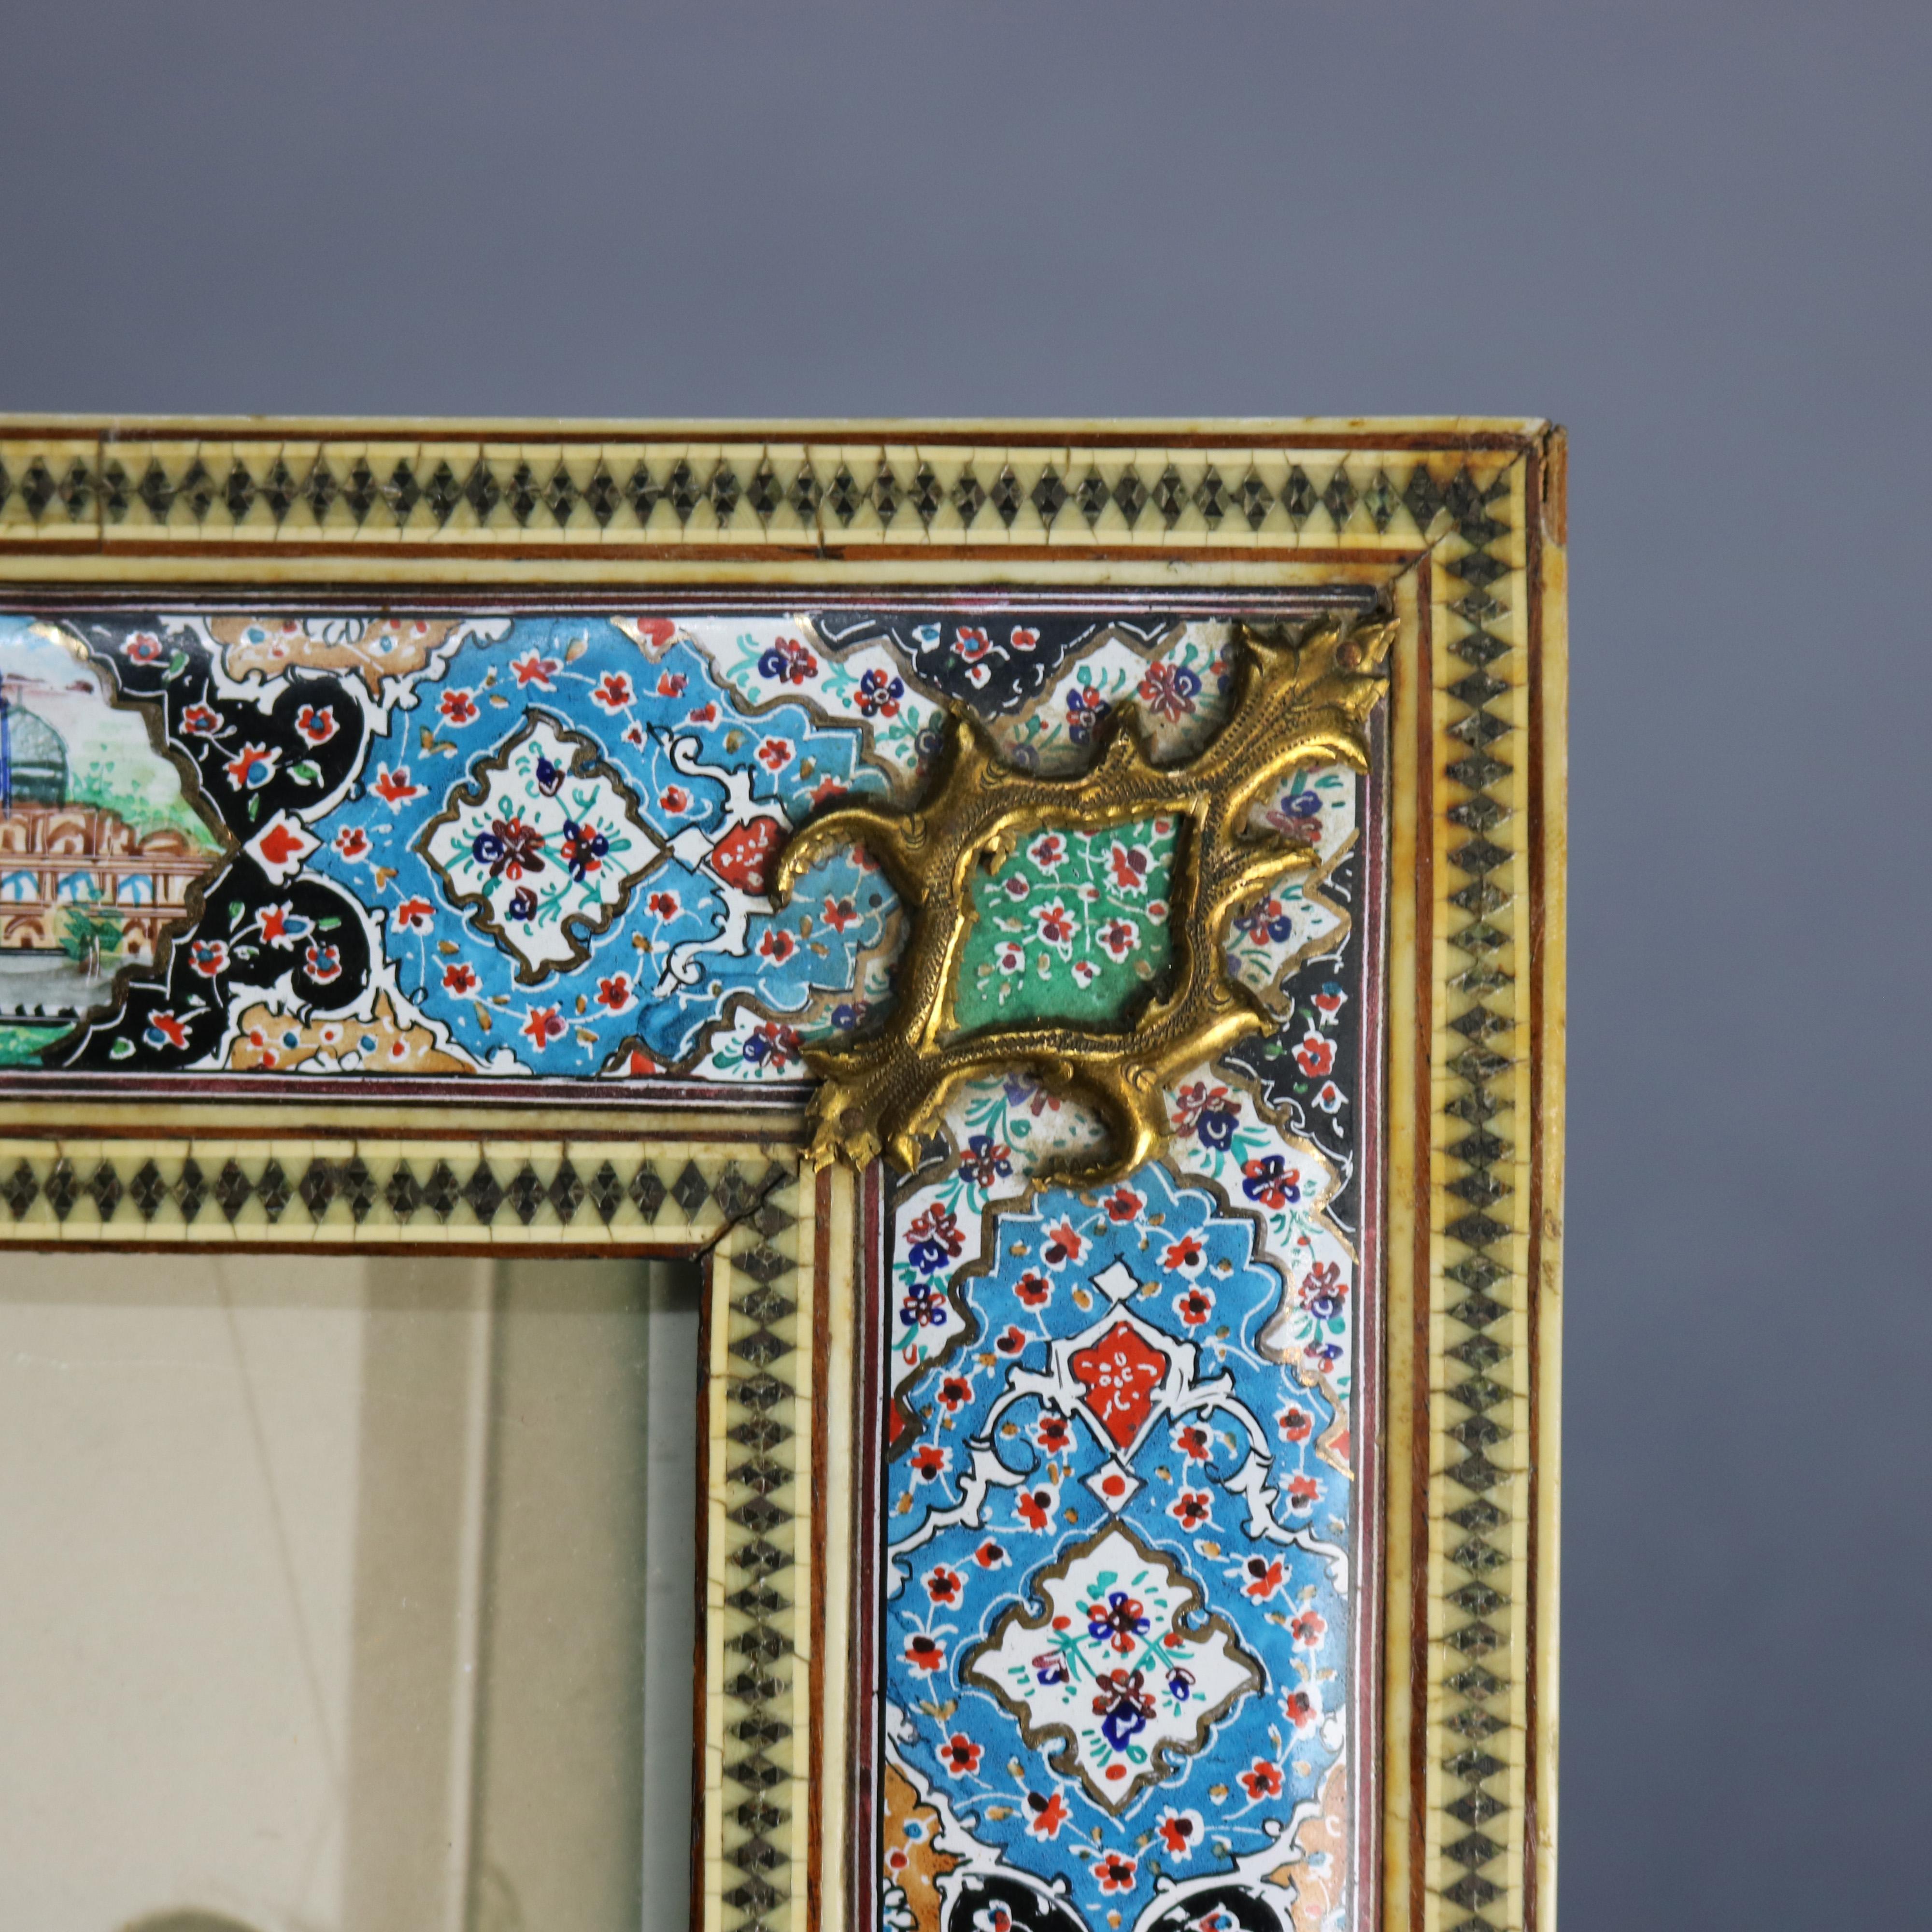 Asian Antique Persian Pictorial Enamel on Copper Picture Frame, 19th Century